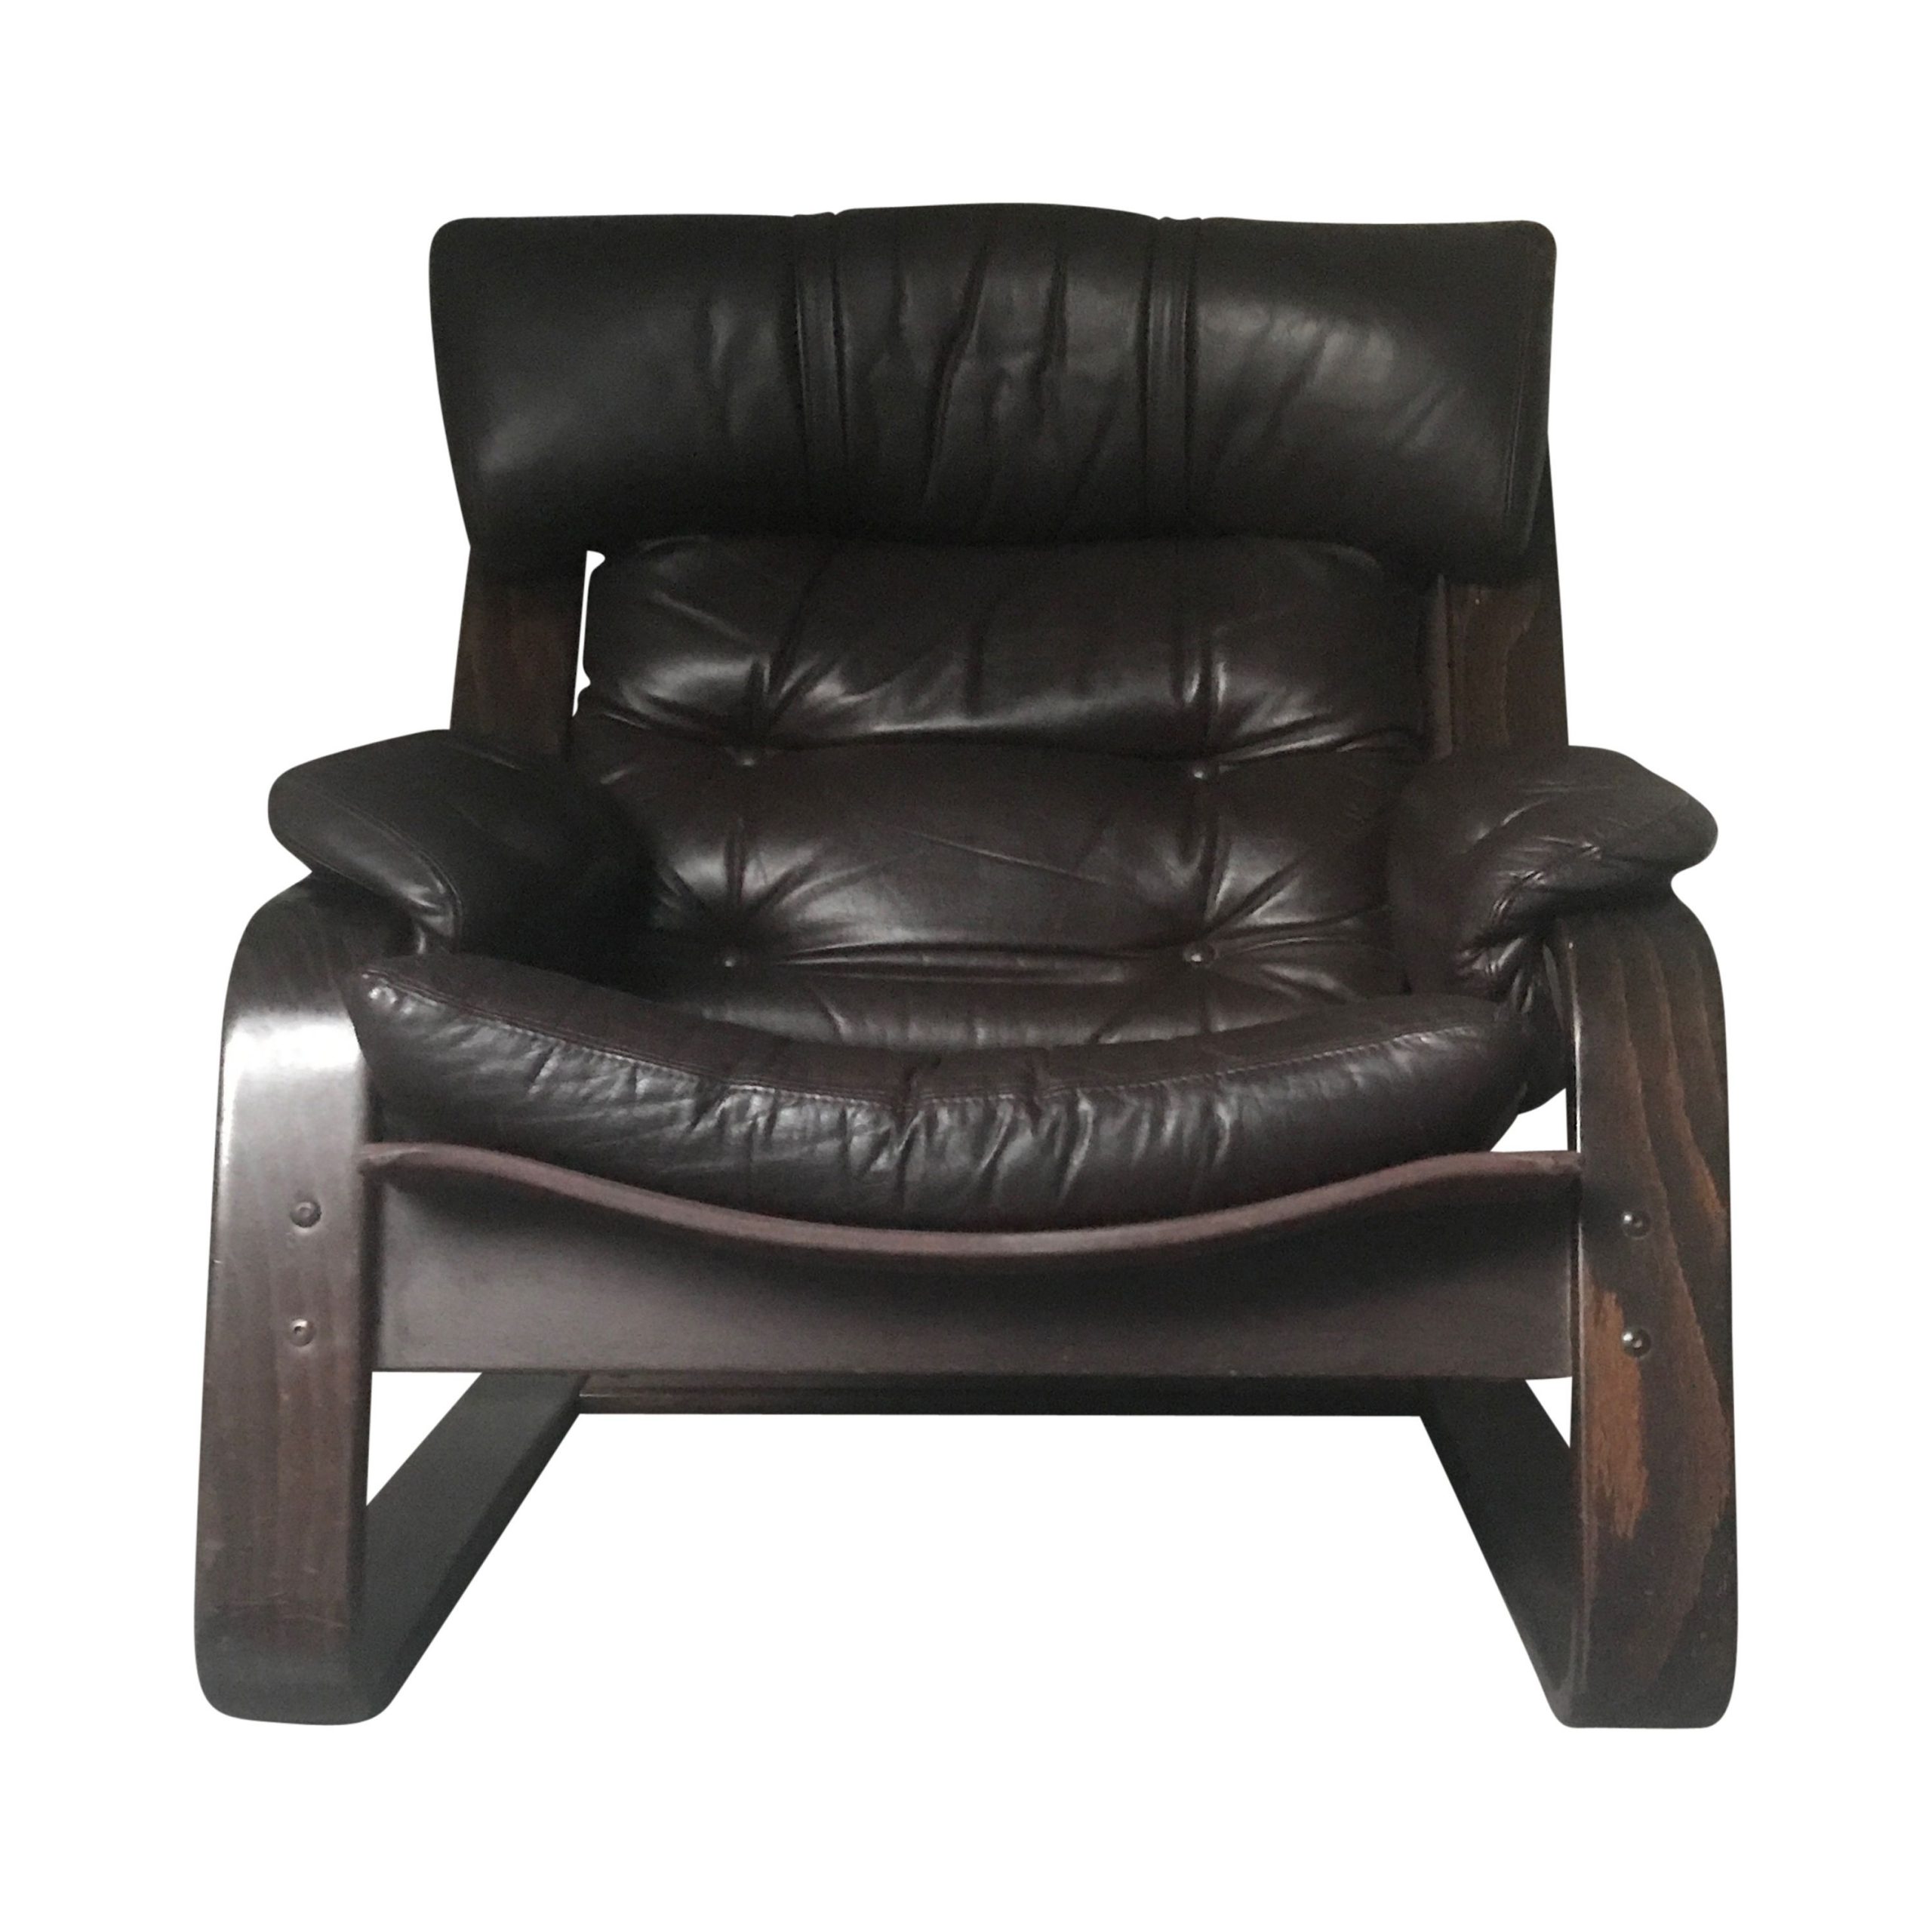 vintage-leather-and-wood-recliner-armchair-by-gote-mobel-sweden-1970s4-scaled-1.jpeg